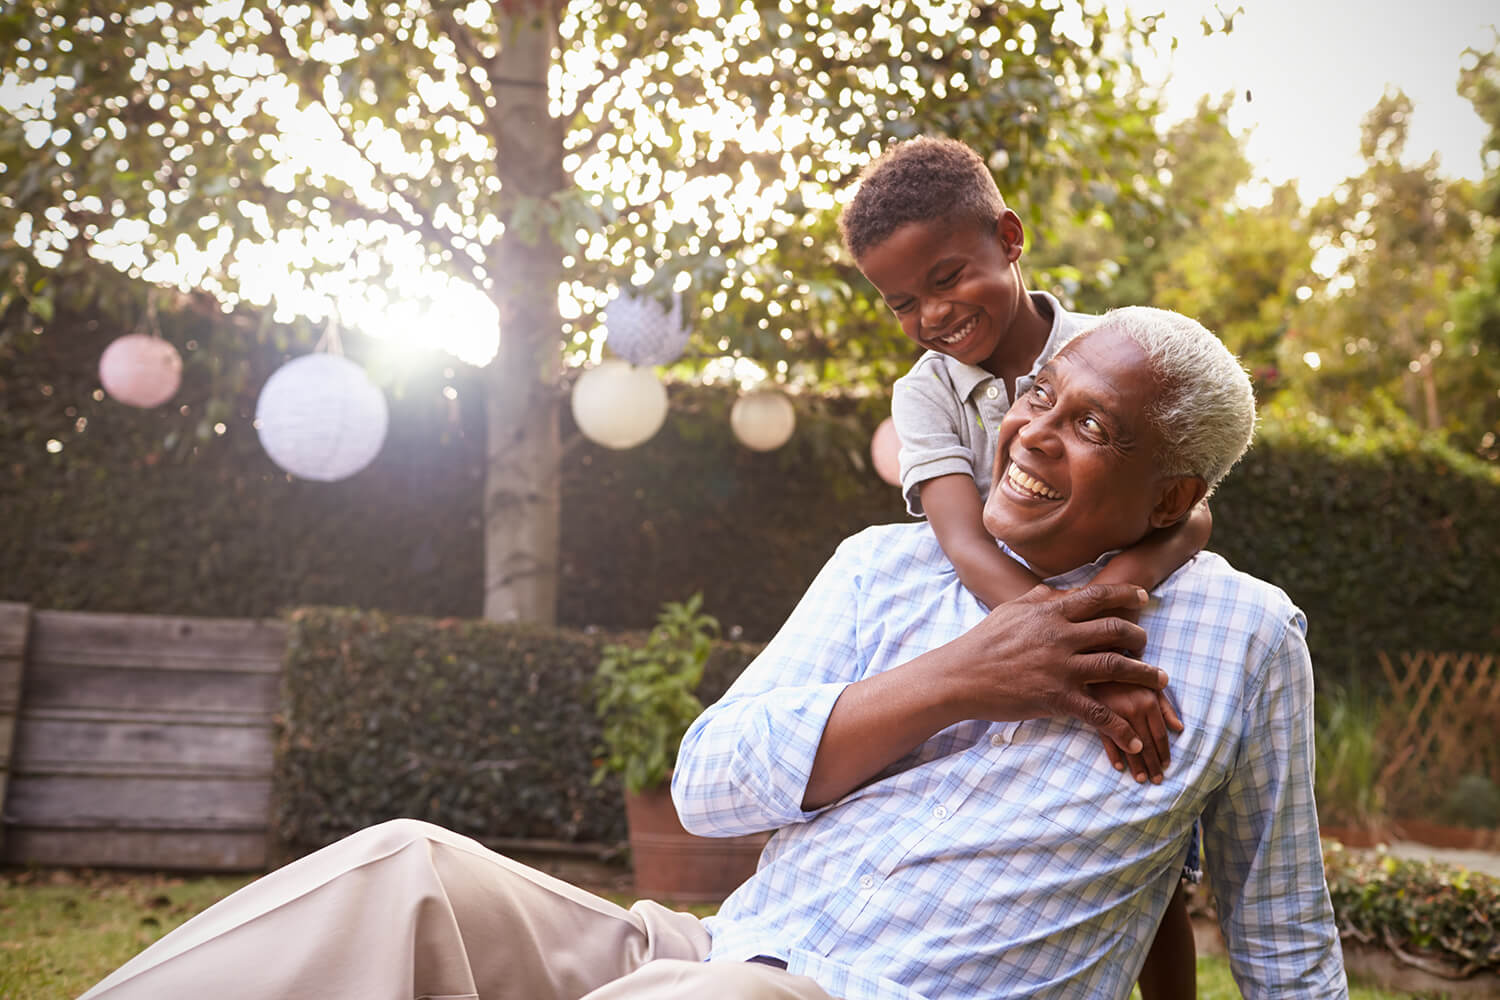 Out in a yard, a man with gray hair gets a hug from a young boy. In certain circumstances, it's possible to get disability benefits for dependents and spouses.